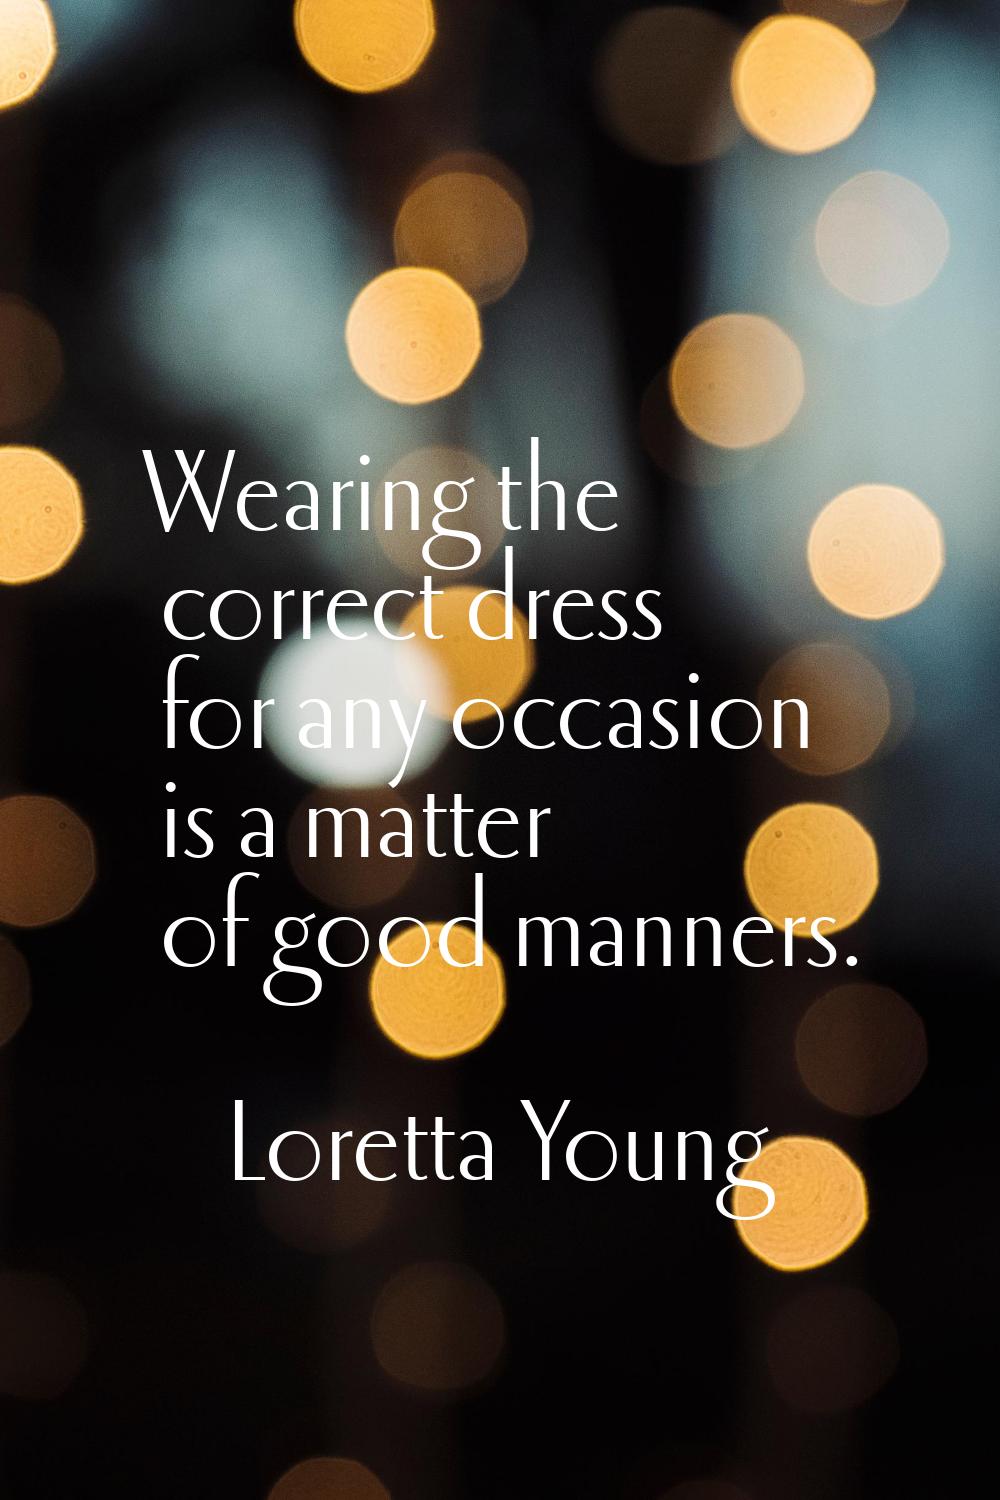 Wearing the correct dress for any occasion is a matter of good manners.